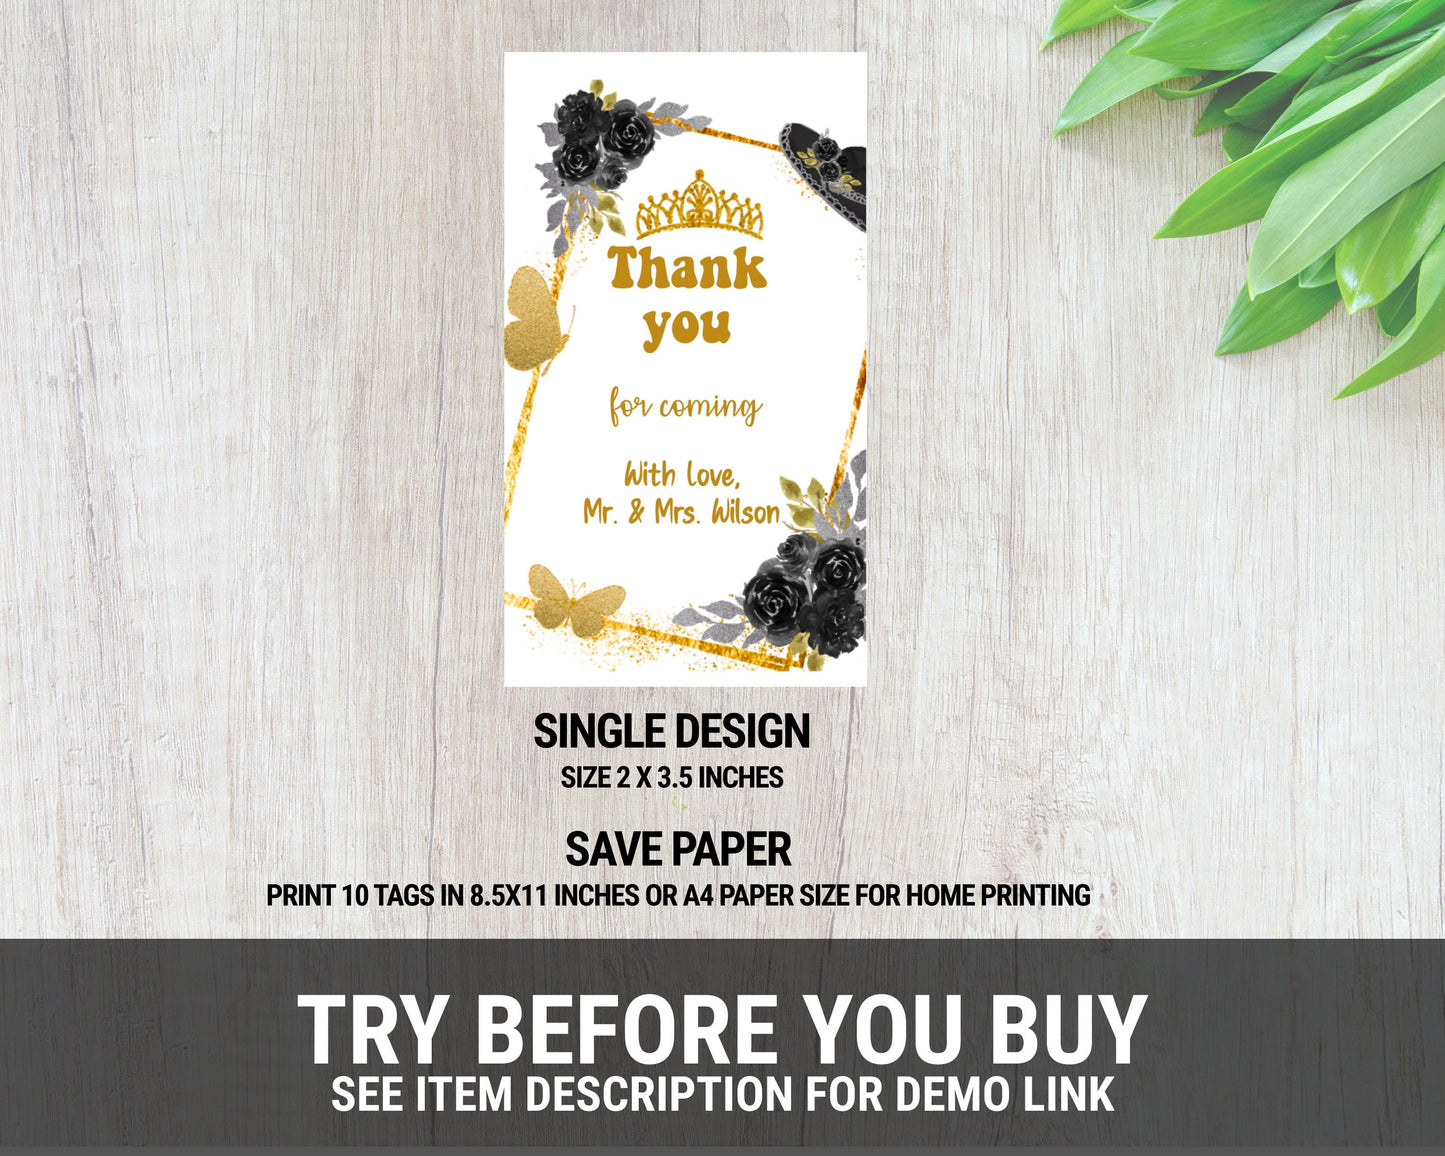 EDITABLE Quinceanera Invitation & Back, Gold Black Flowers, Mis Quince Anos, 15th Birthday, Corjl Template Printable Instant Download, QL